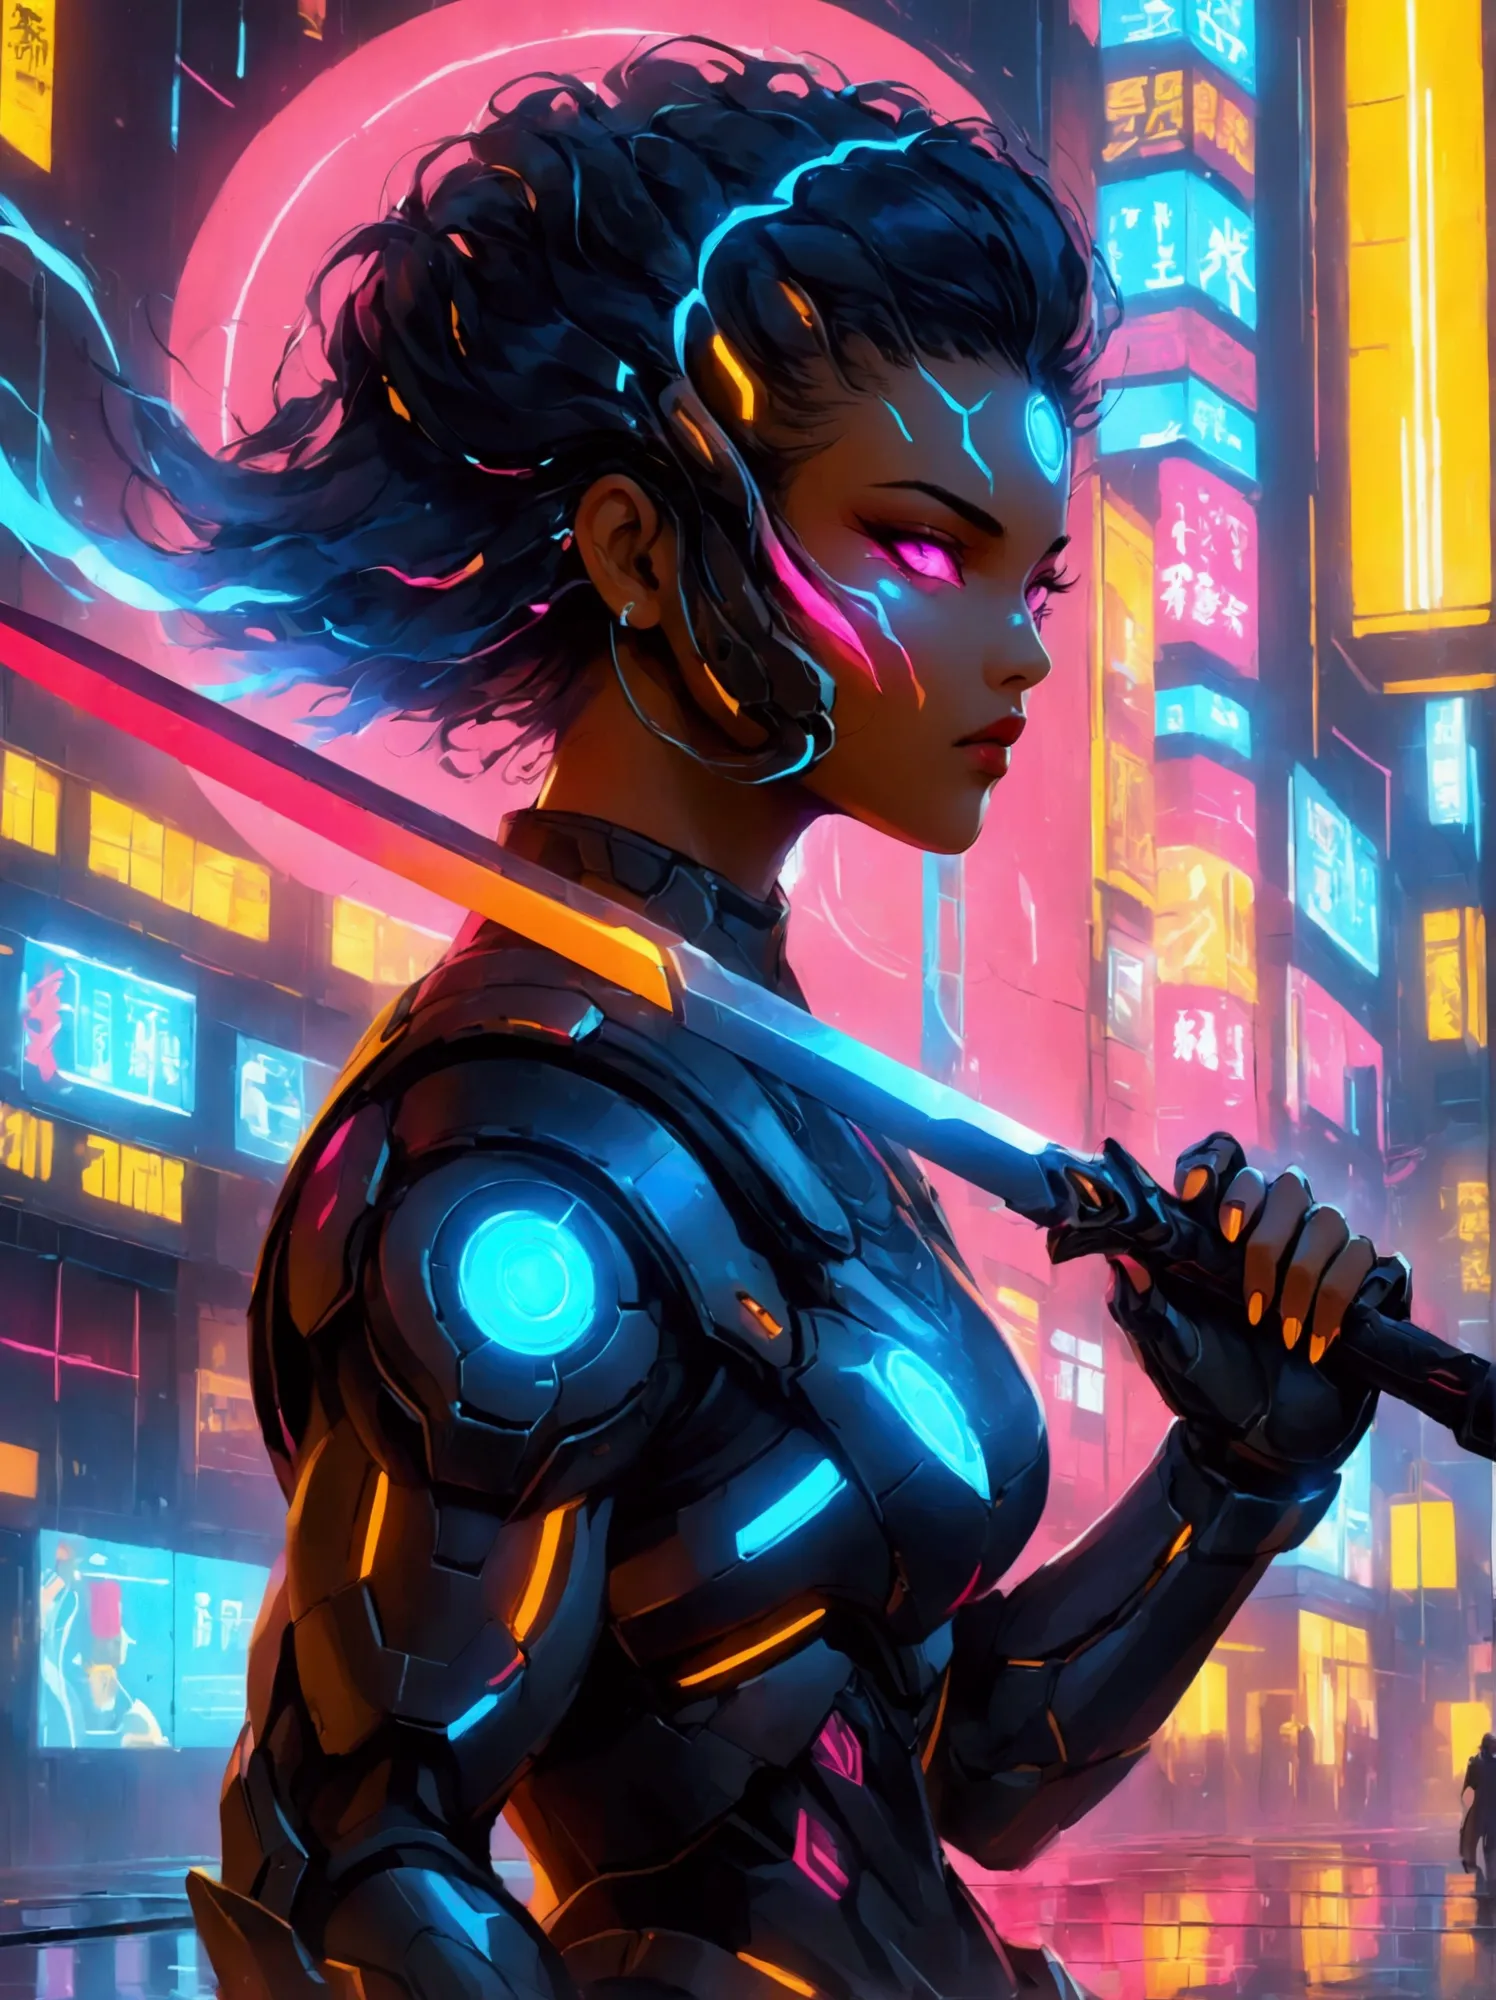 A futuristic warrior, resplendent in glowing armor of vibrant neon shades, stands poised in an active, dynamic stance. The warri...